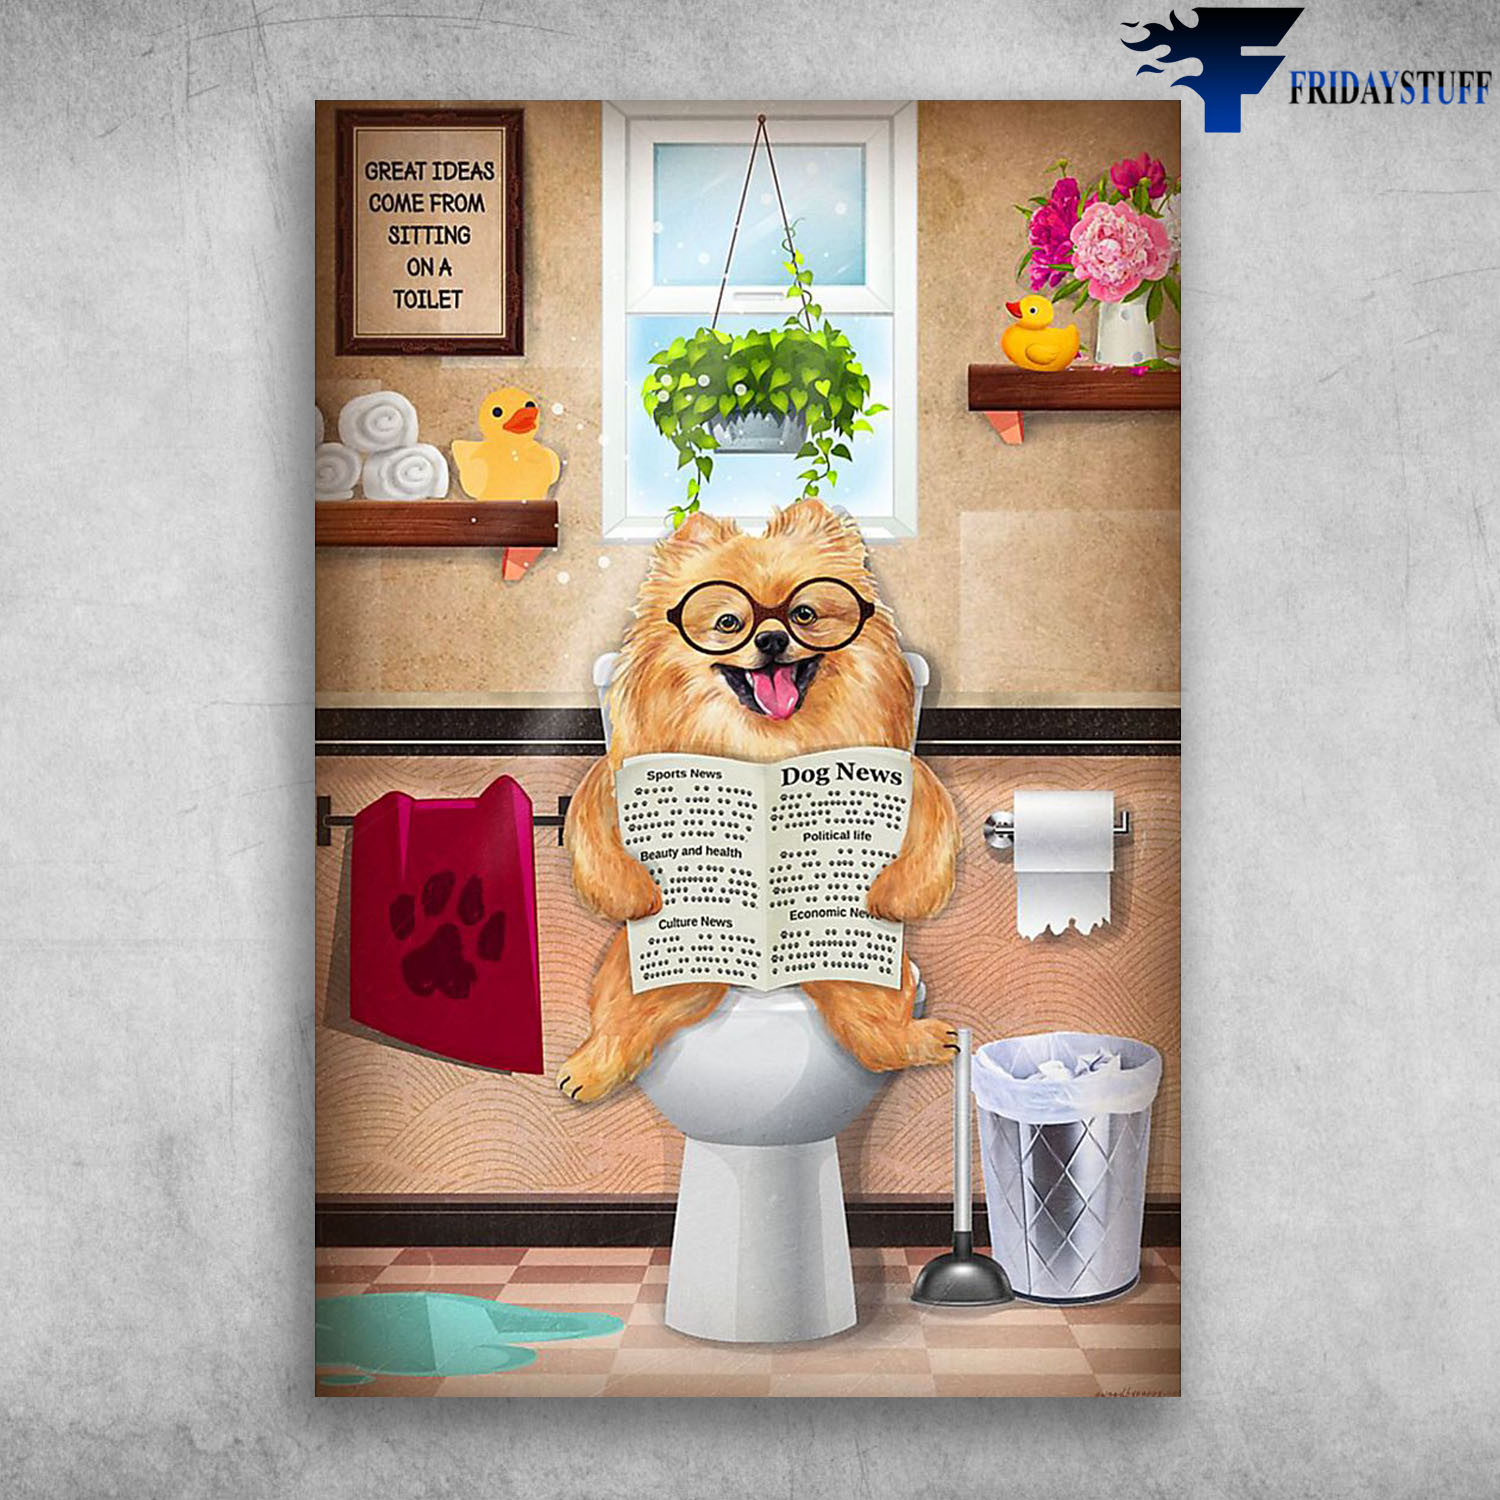 Funny Cute Dog Read Newspaper In Toilet Great Ideas Come From Sitting On A Toilet